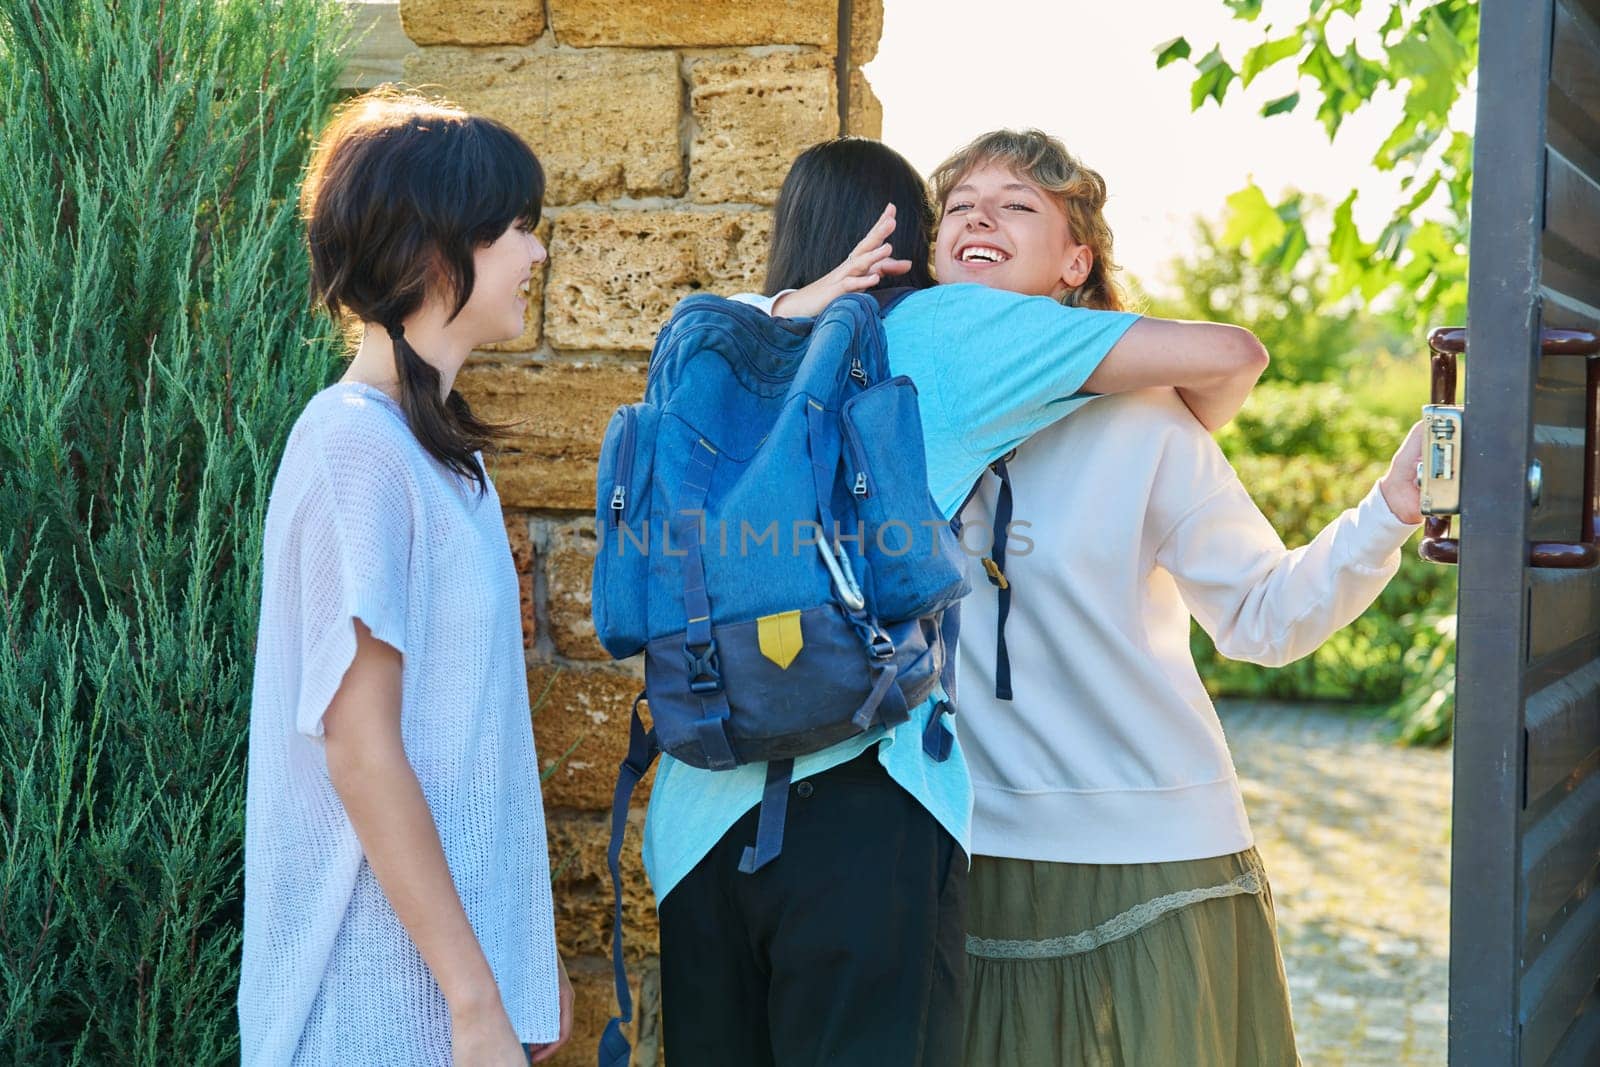 Meeting of friends, young female with guy and girl joyfully hugging near front door by VH-studio